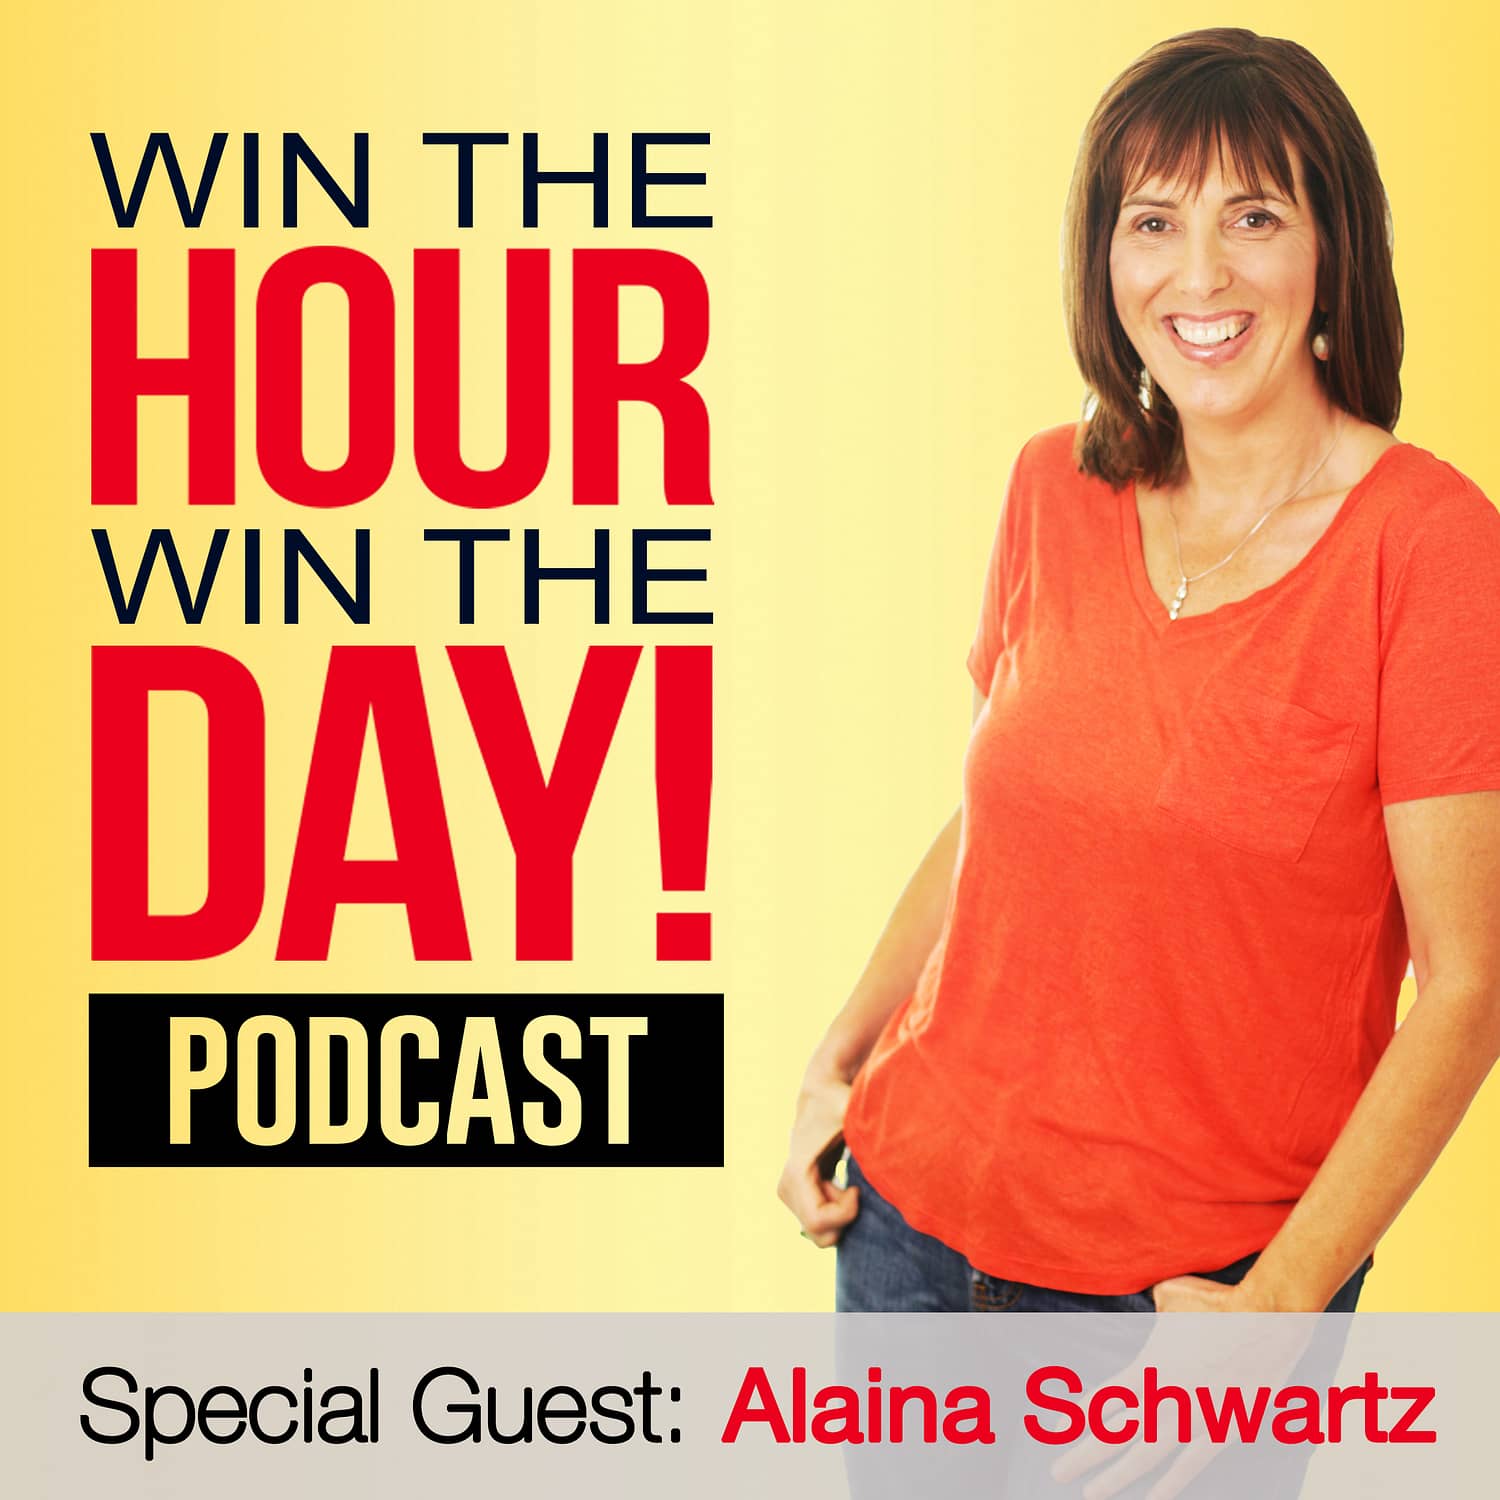 Changing Small Habits Can Give Big Results! With Alaina Schwartz